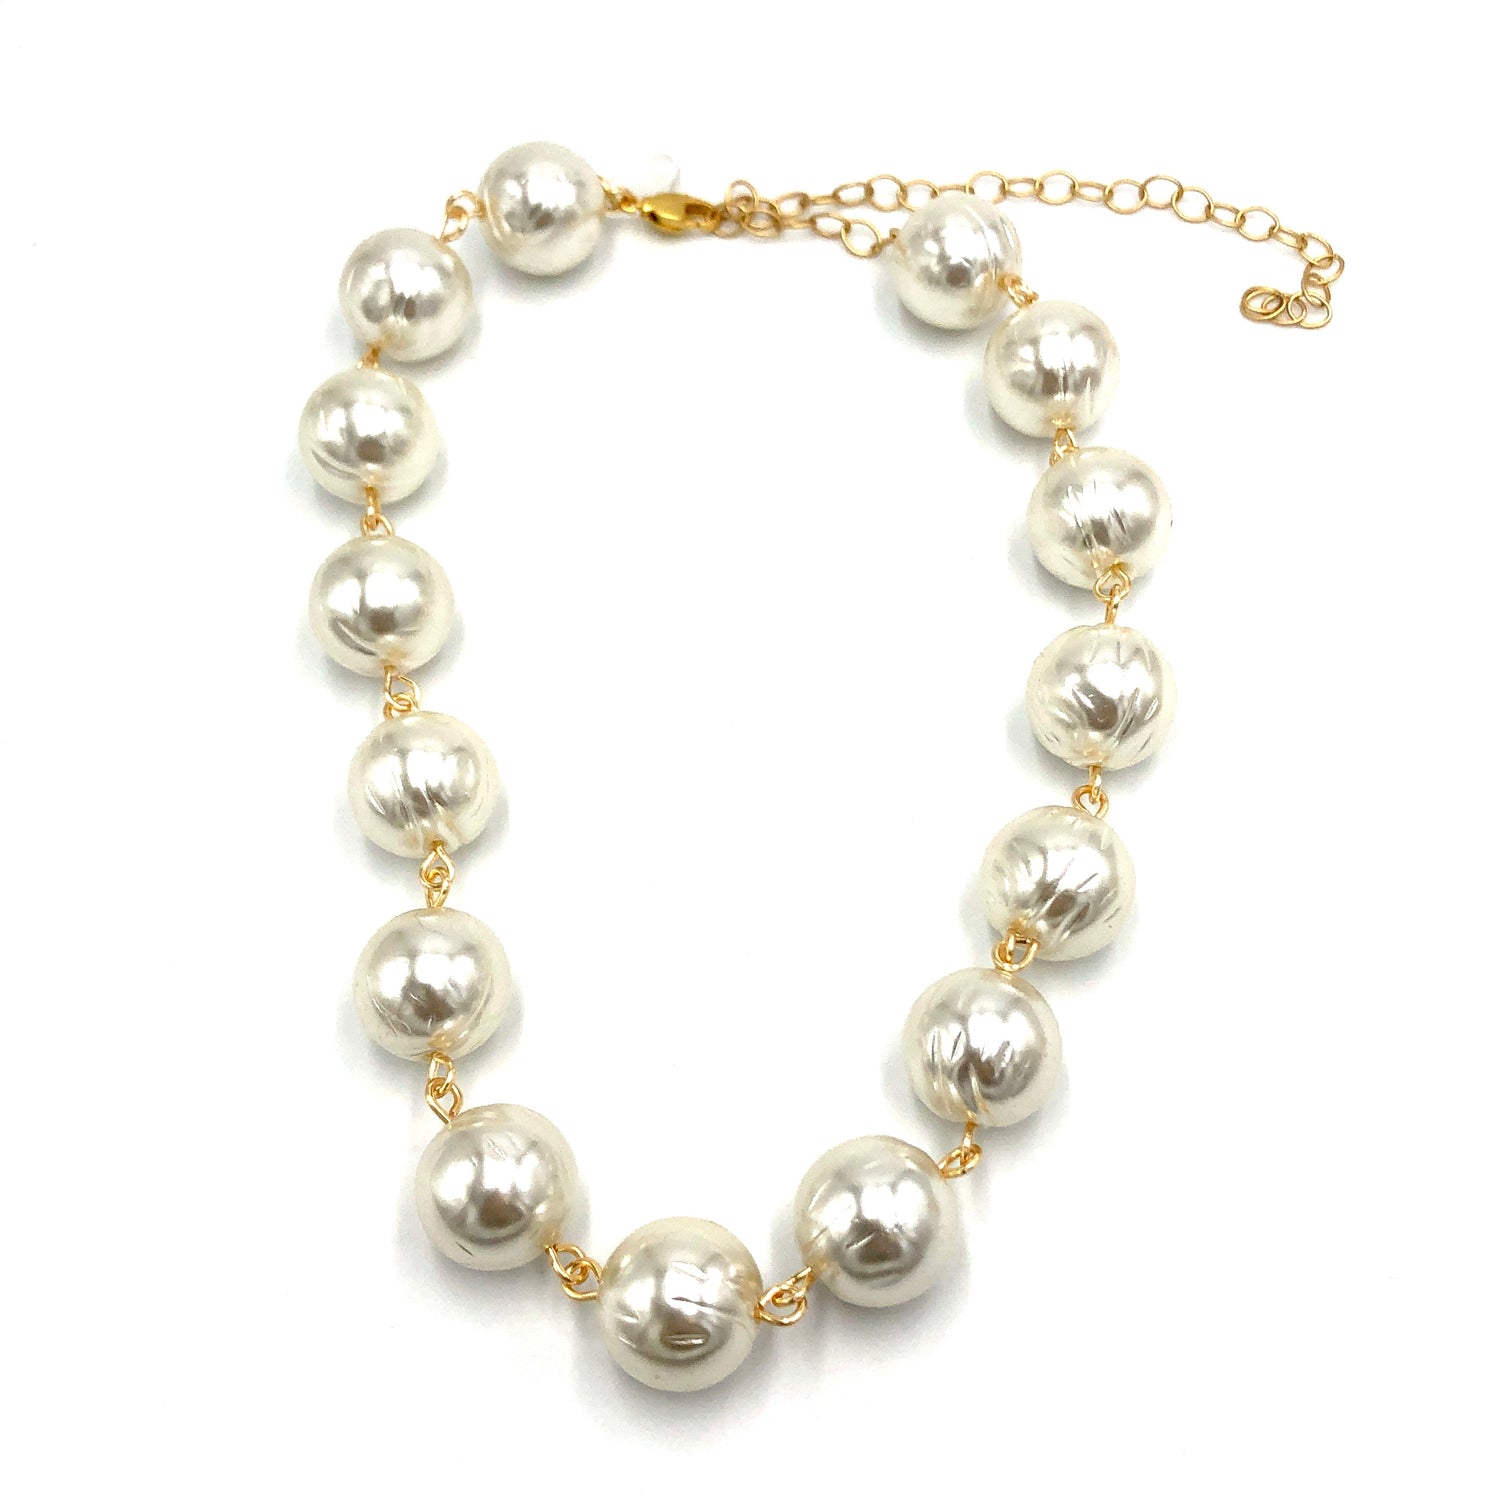 Wrinkled Pearls Amelia Necklace